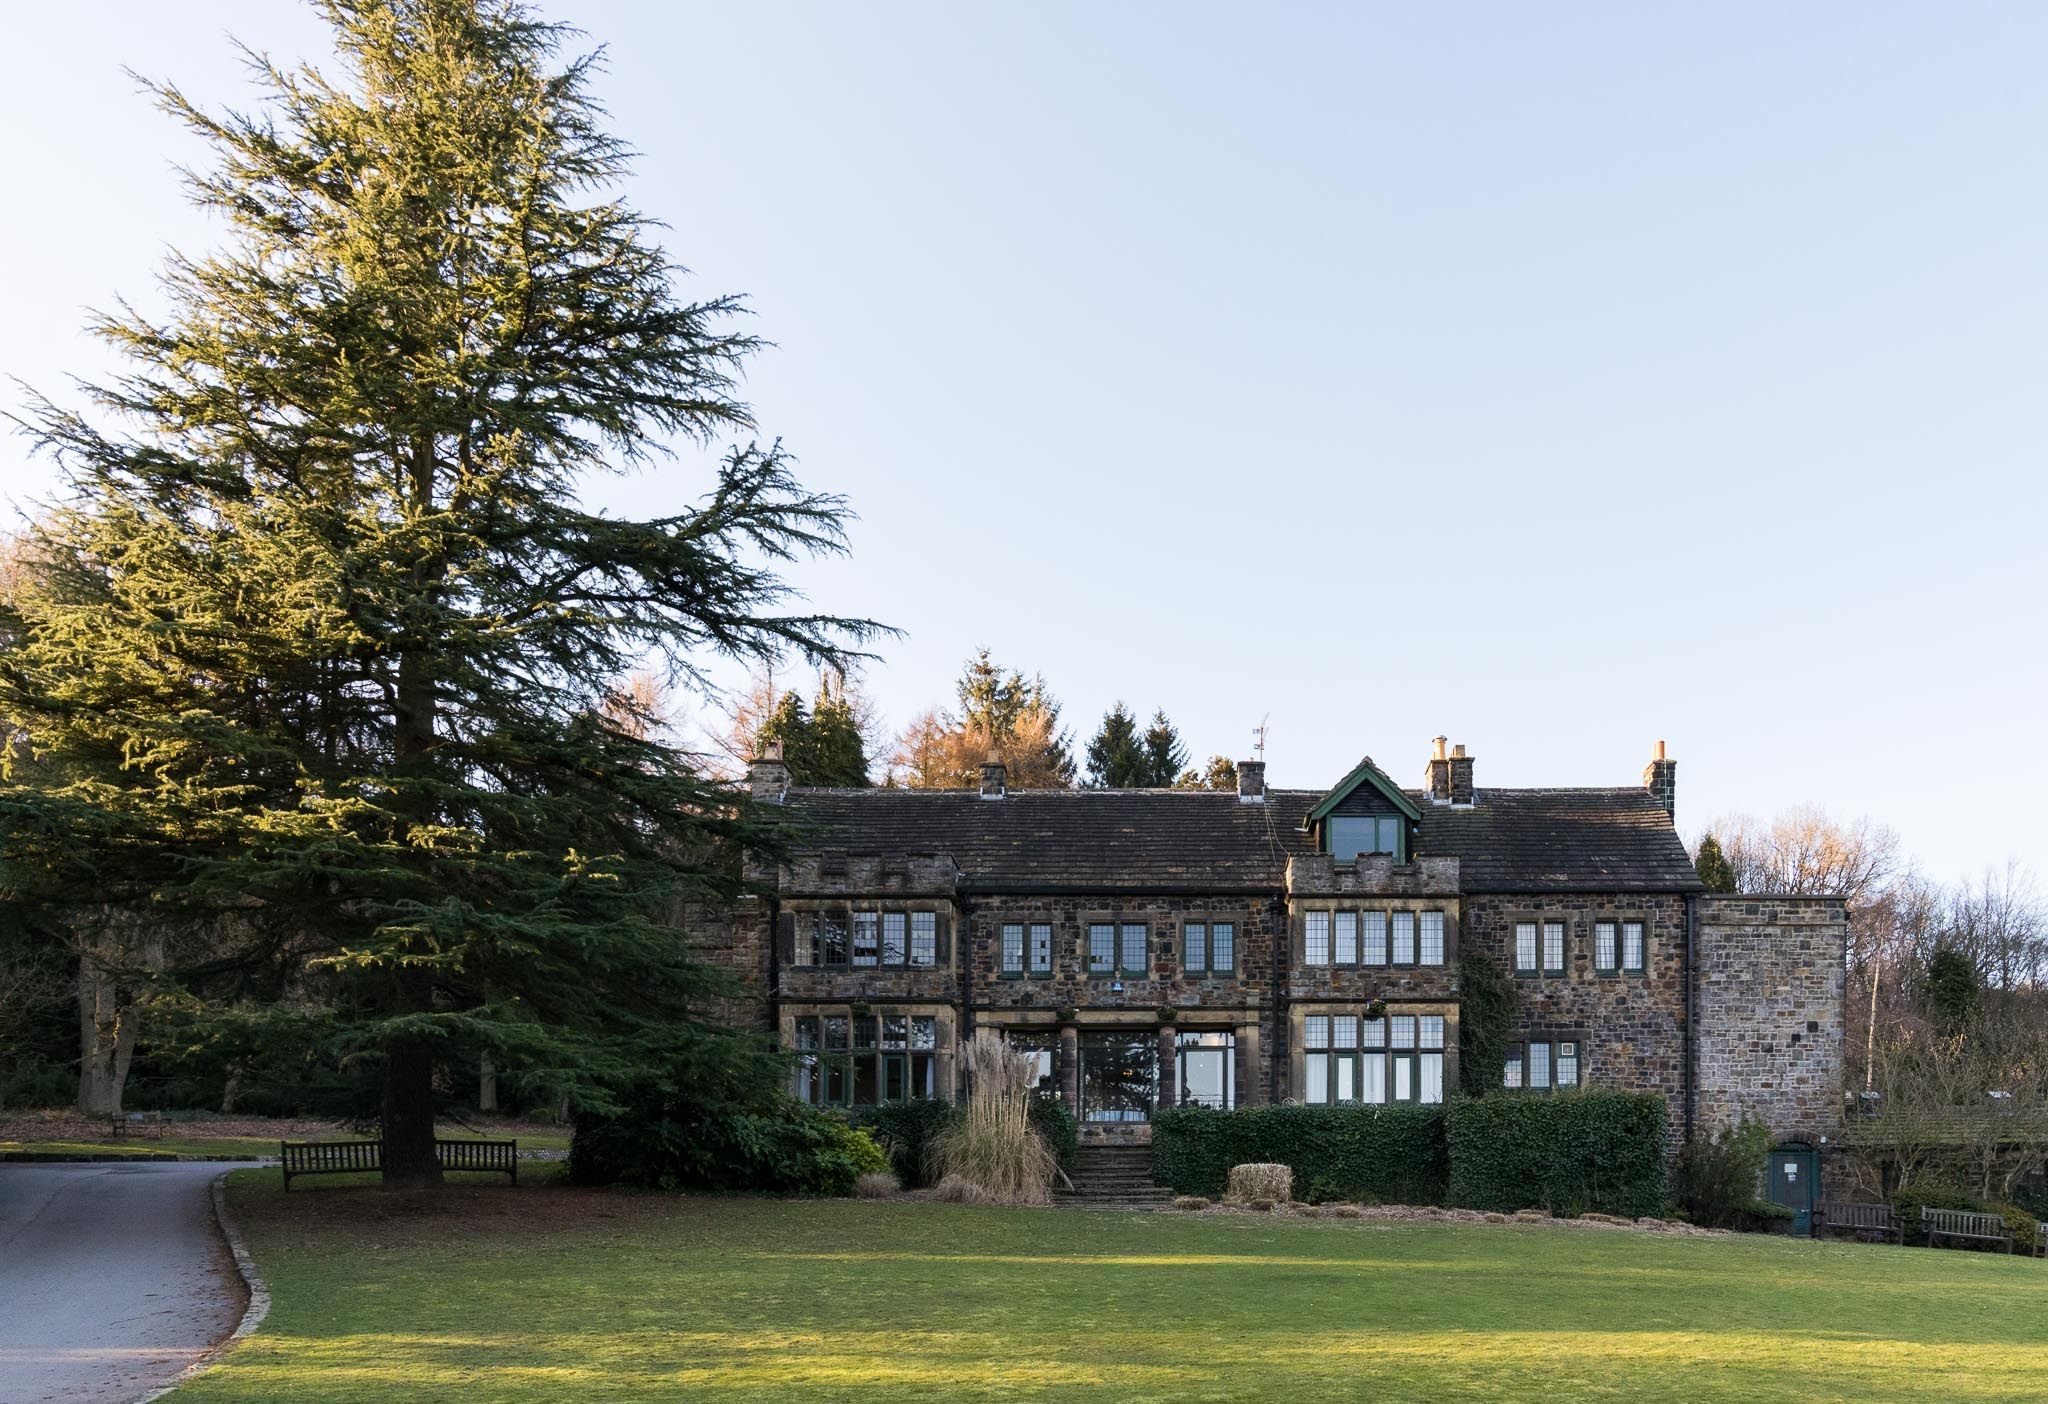 Introducing Whirlow Brook Hall: A Venue for Every Wedding Season